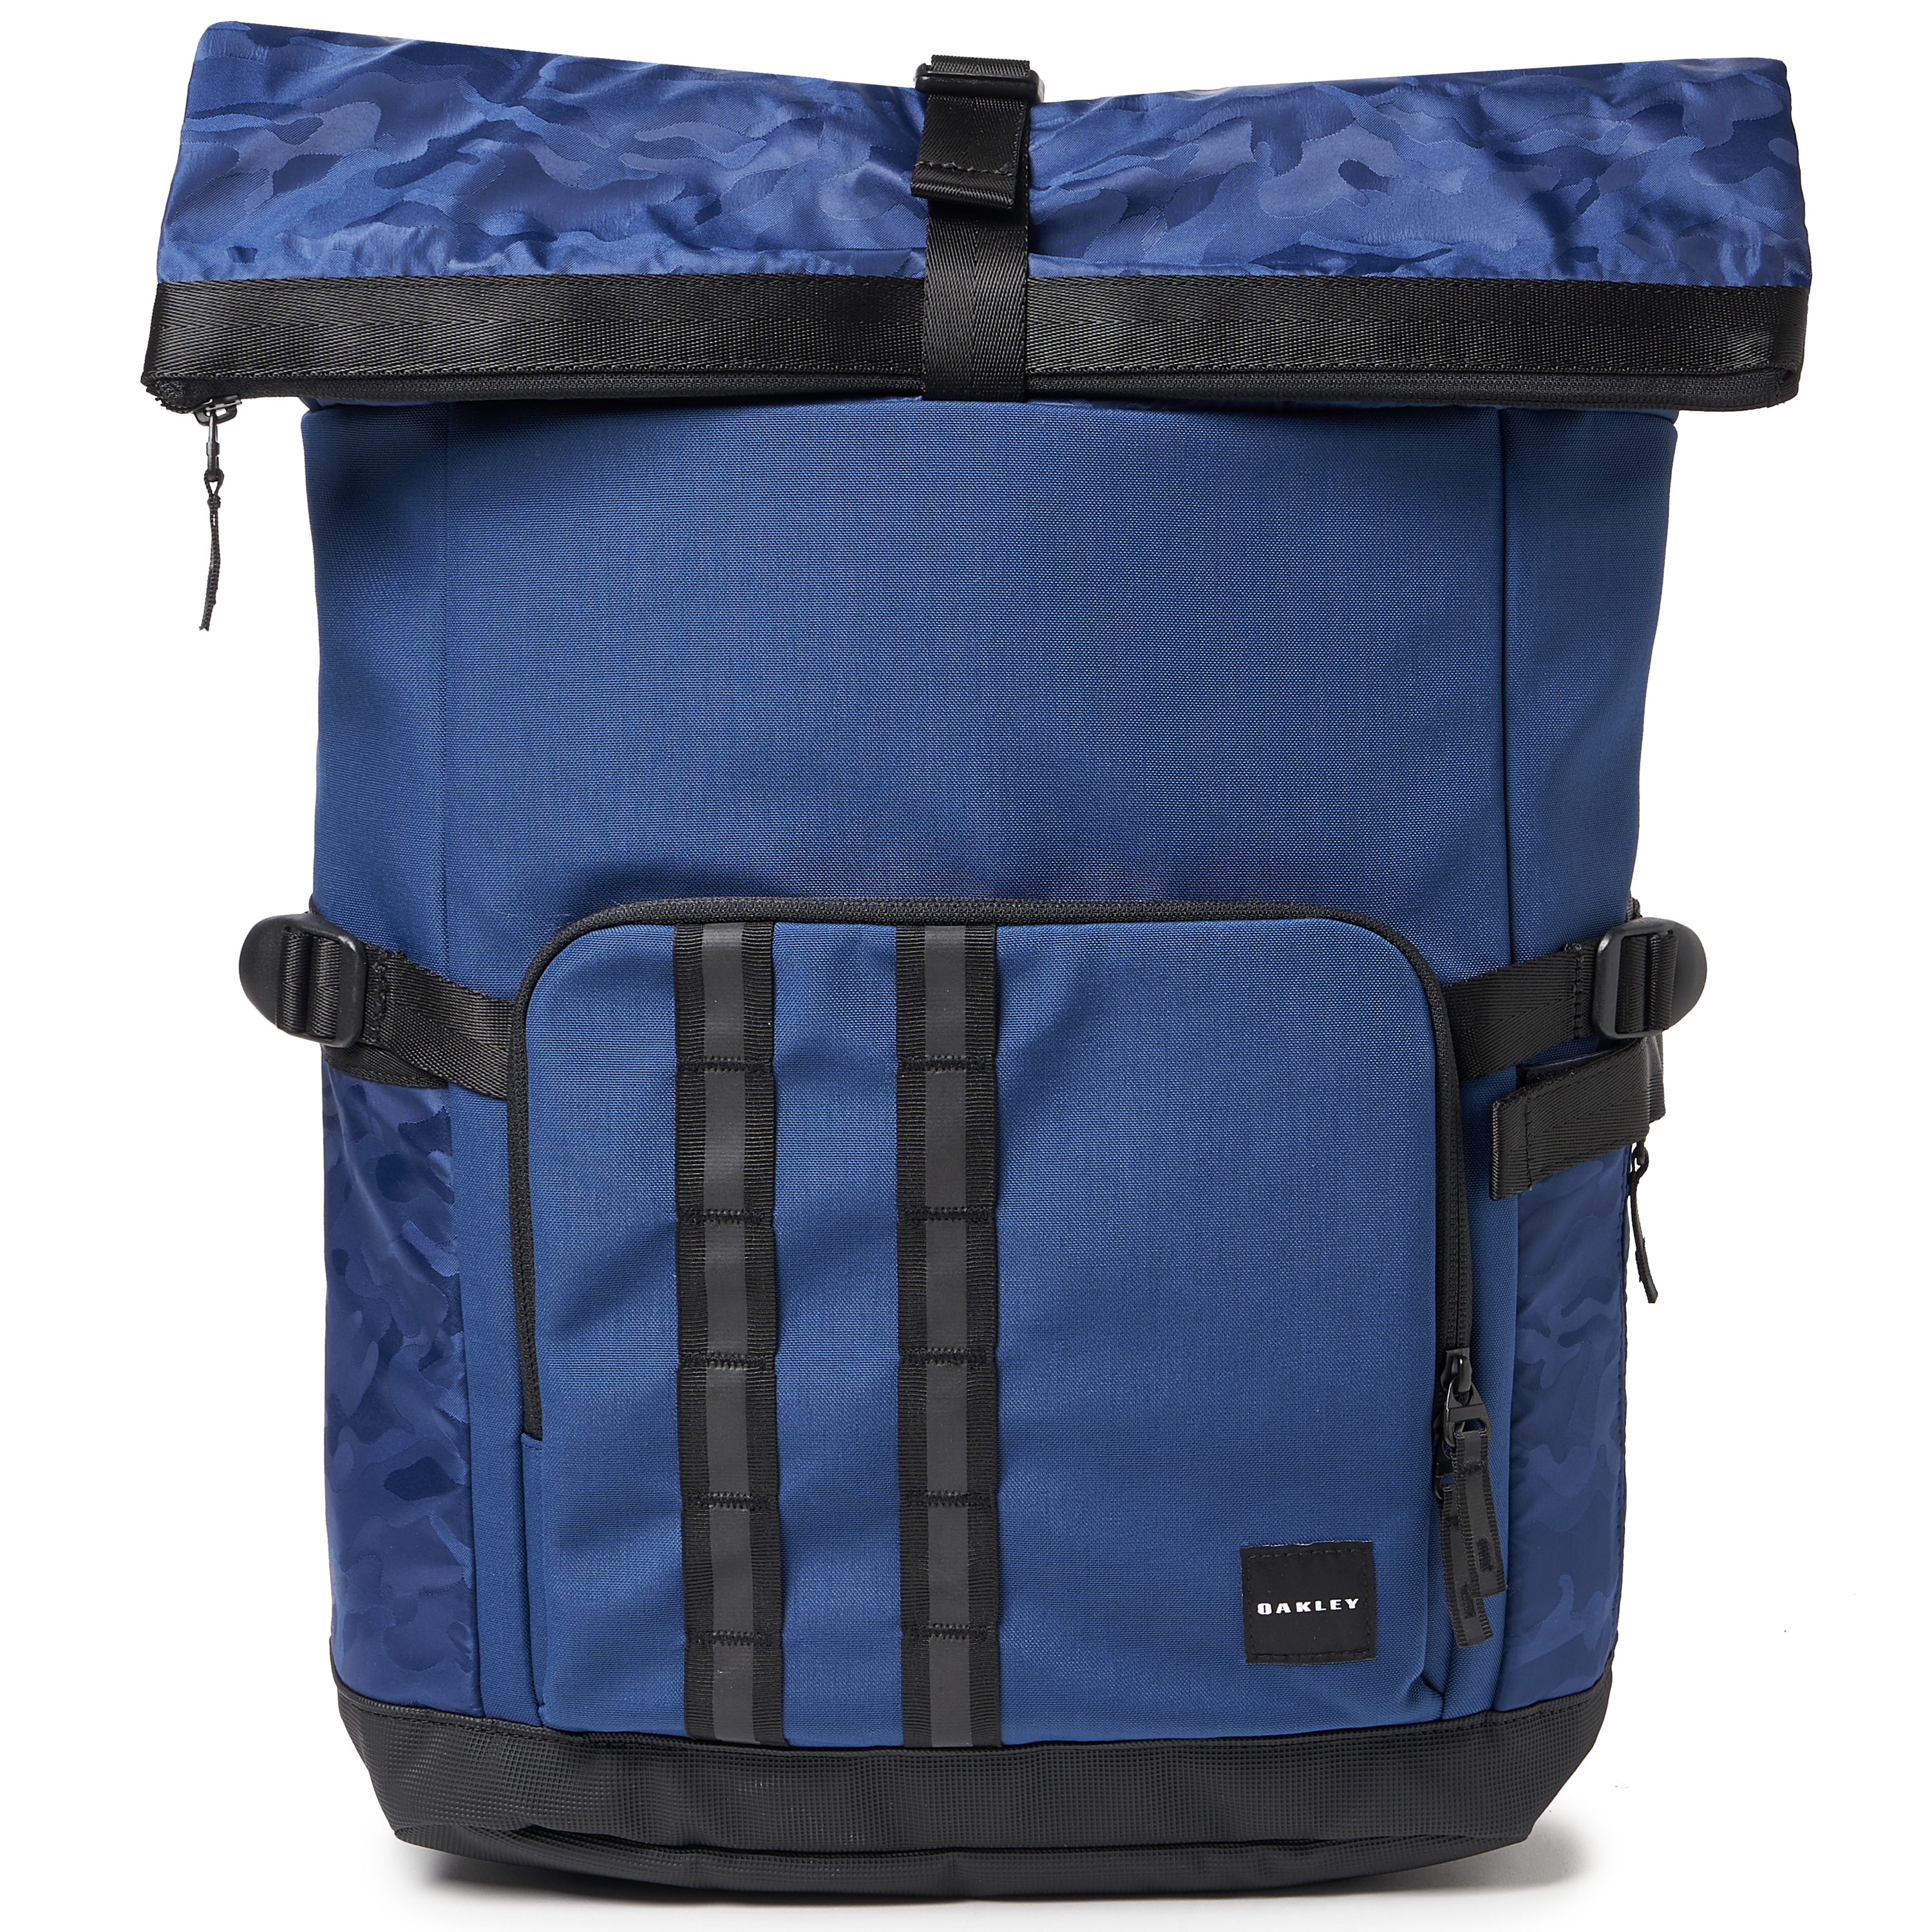 Oakley Utility Rolled Up Backpack 